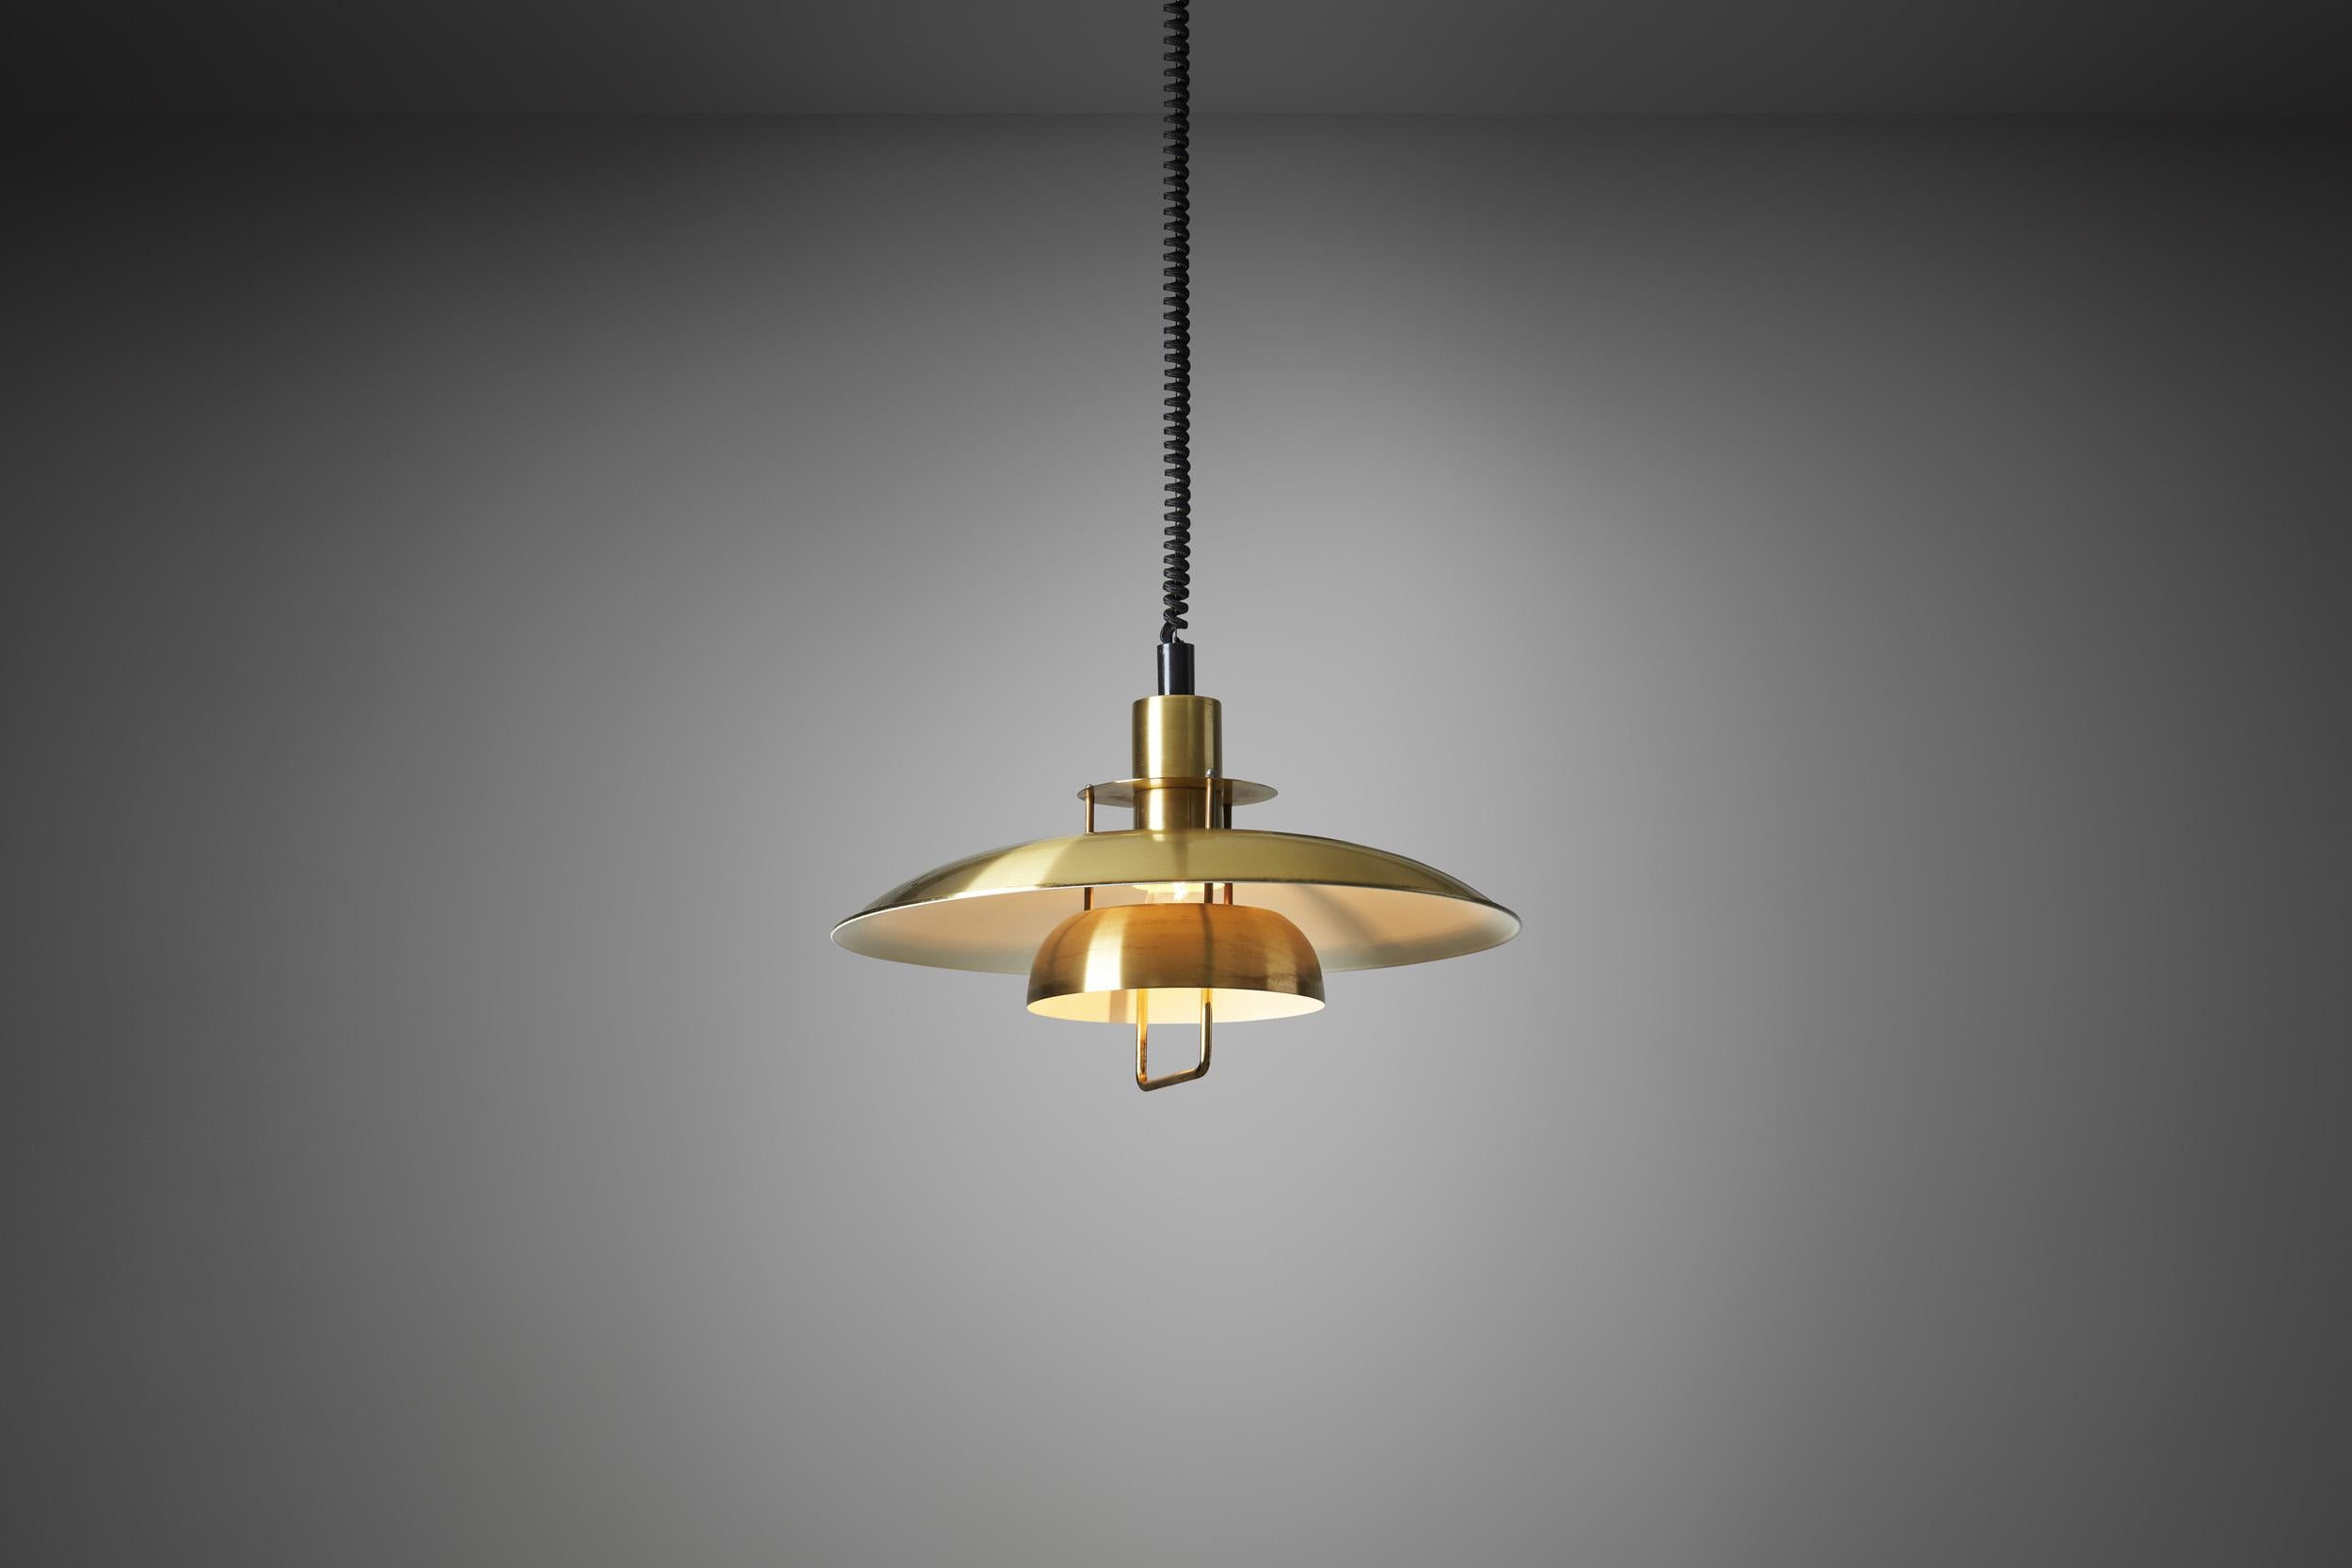 This pendant produced by Lyskjær Belysning is a beautiful example of the functional and stylish characteristic of mid-century Danish design. This model appears modern and classic at the same time, signalling a true timeless design.

This model,